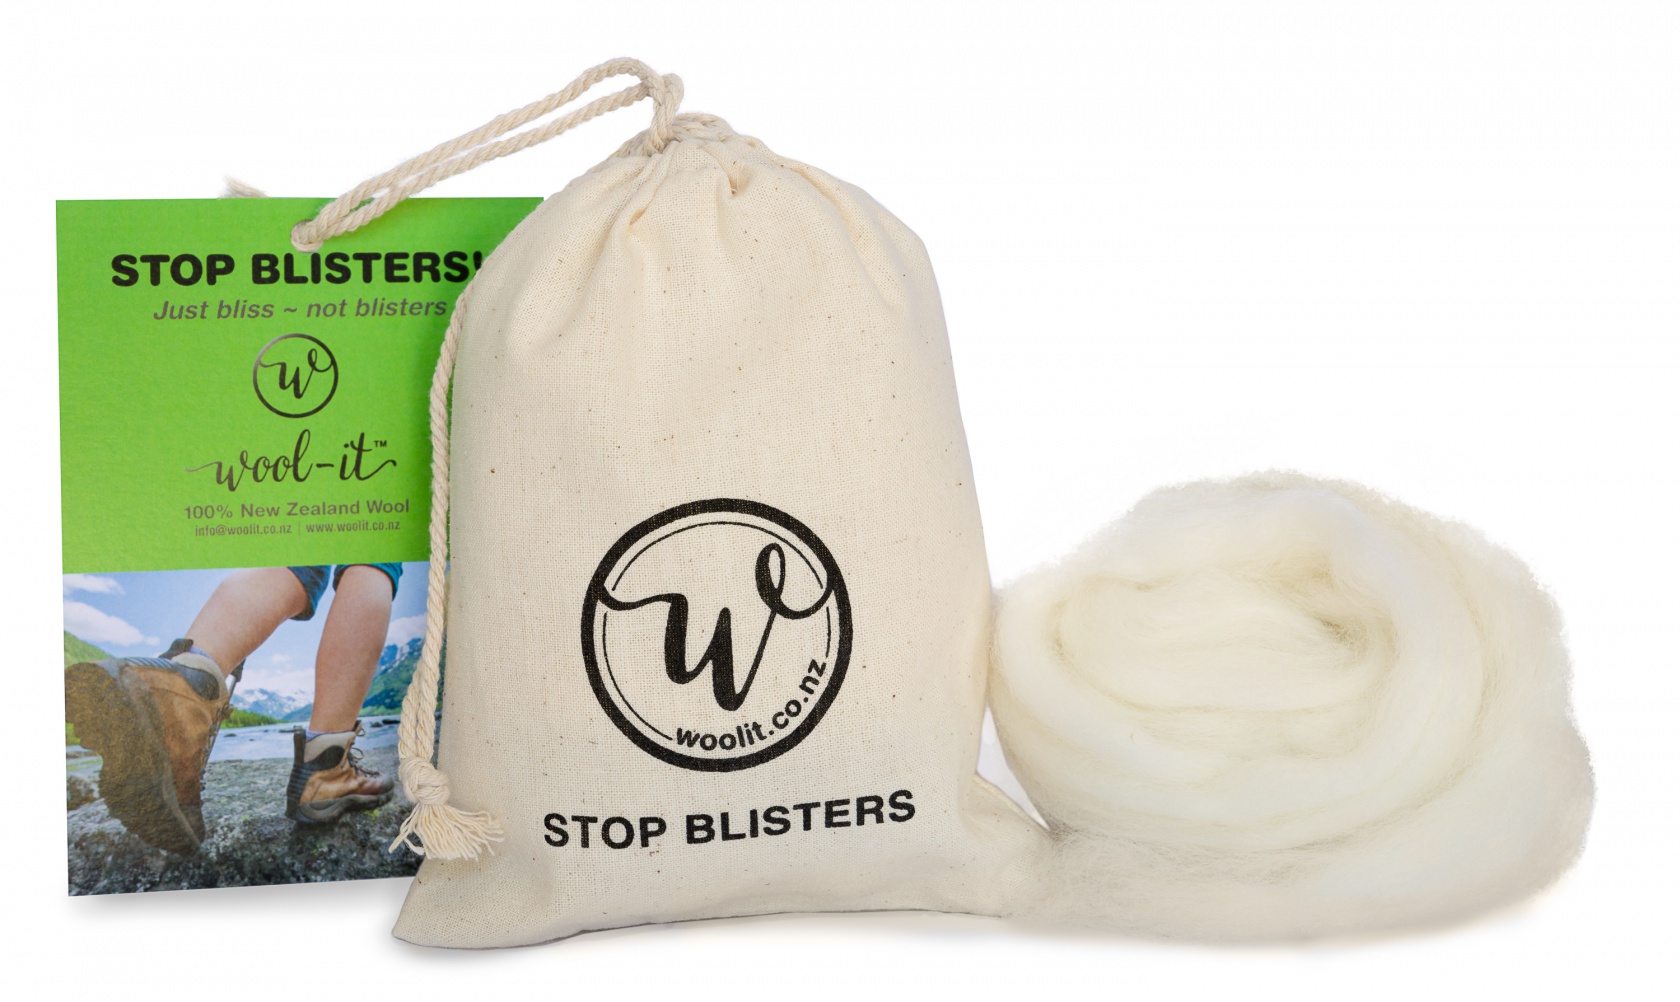 Wool-it Blister Prevention 20g Calico Bag image 0